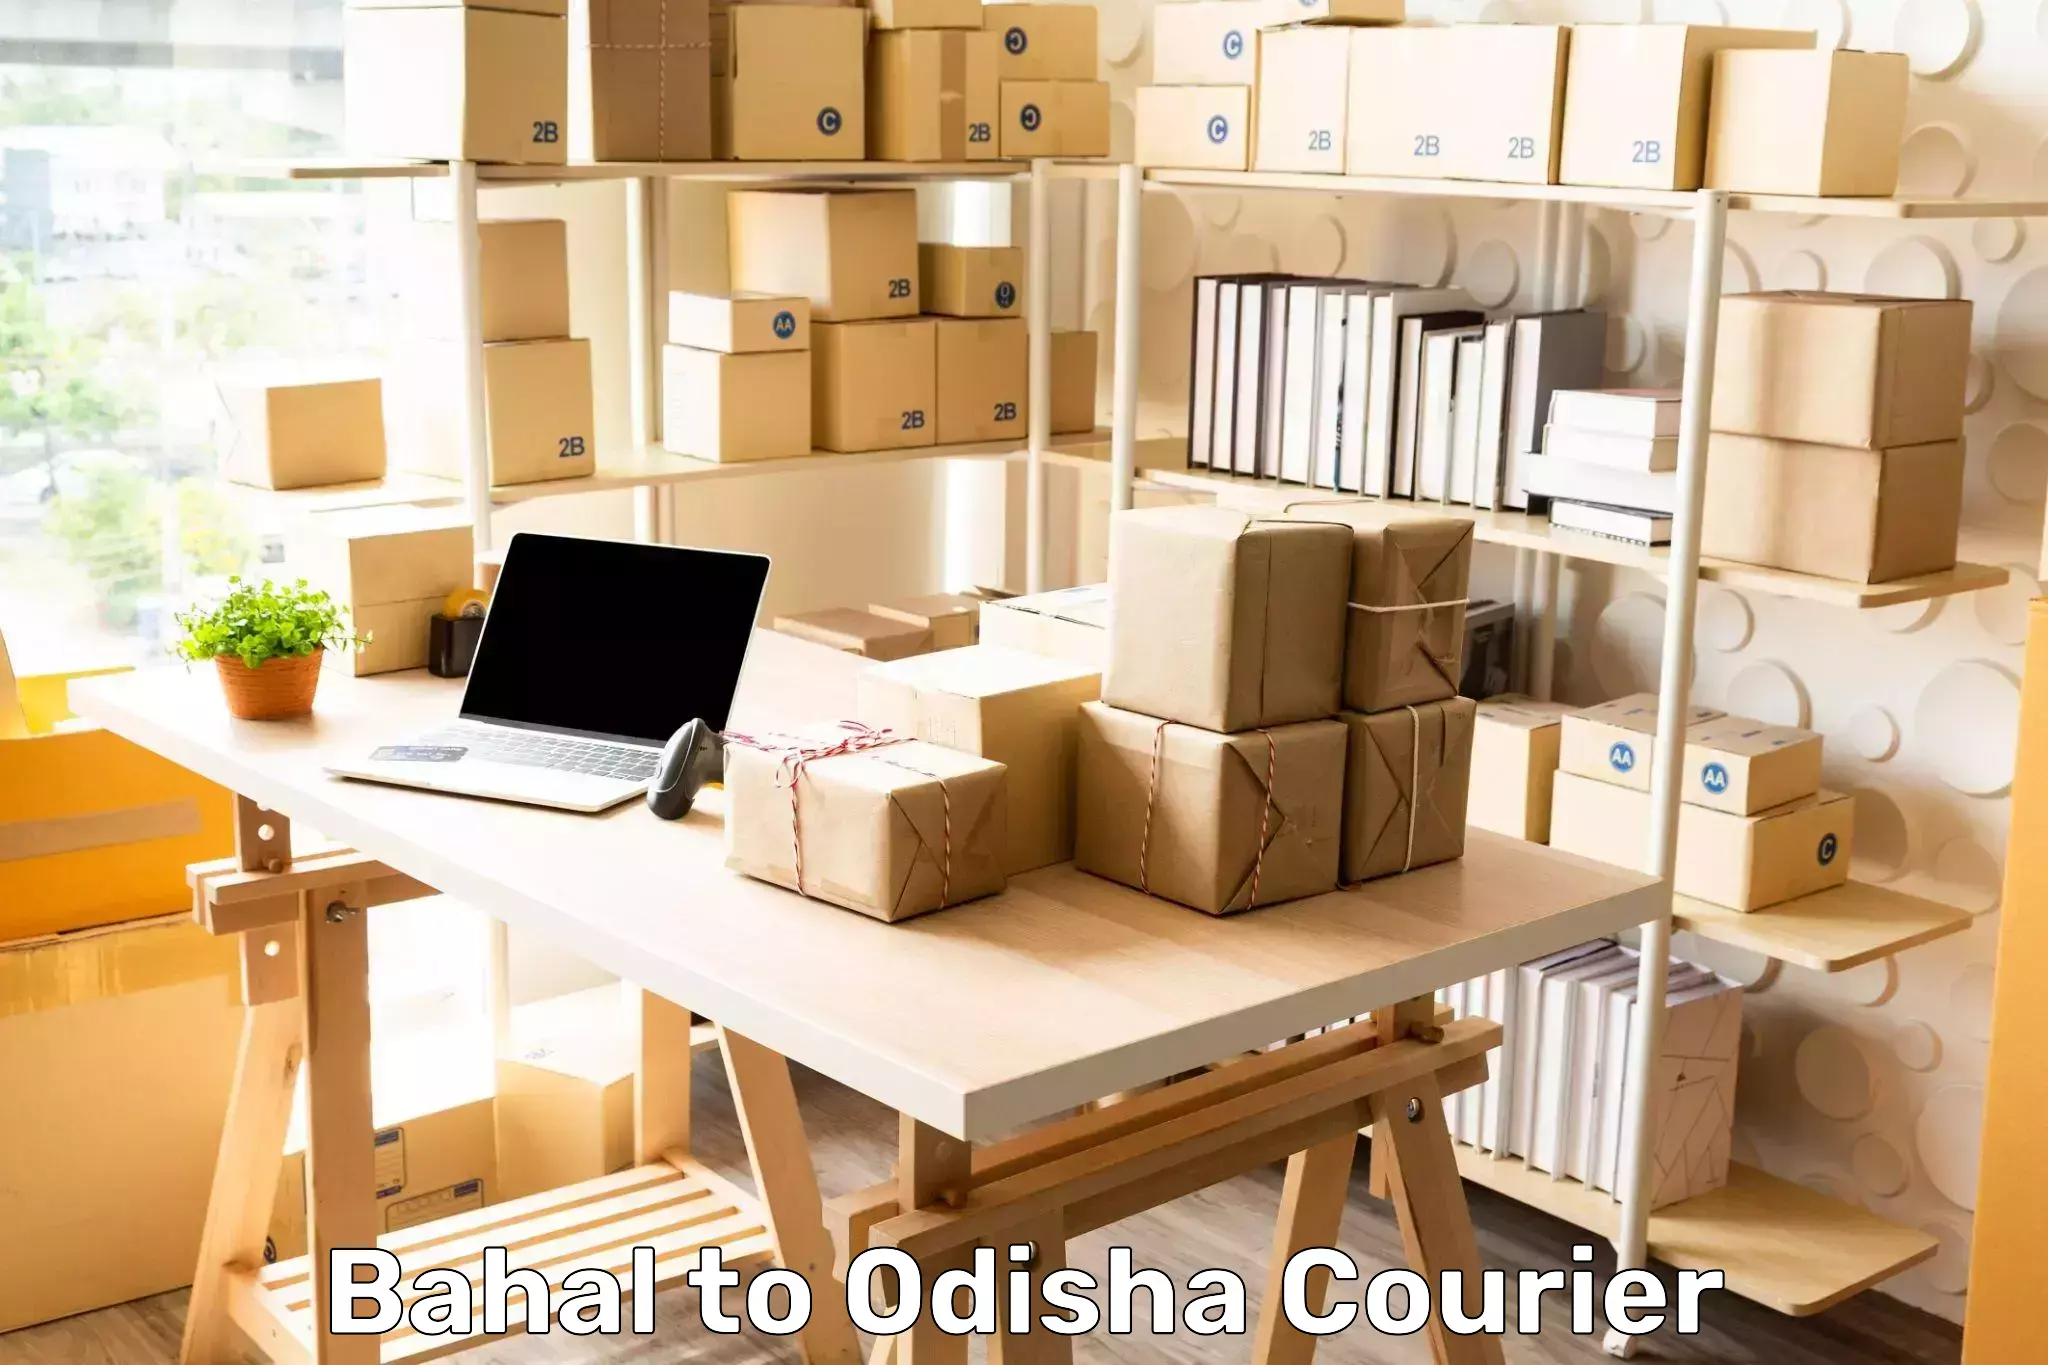 Nationwide parcel services Bahal to Odisha